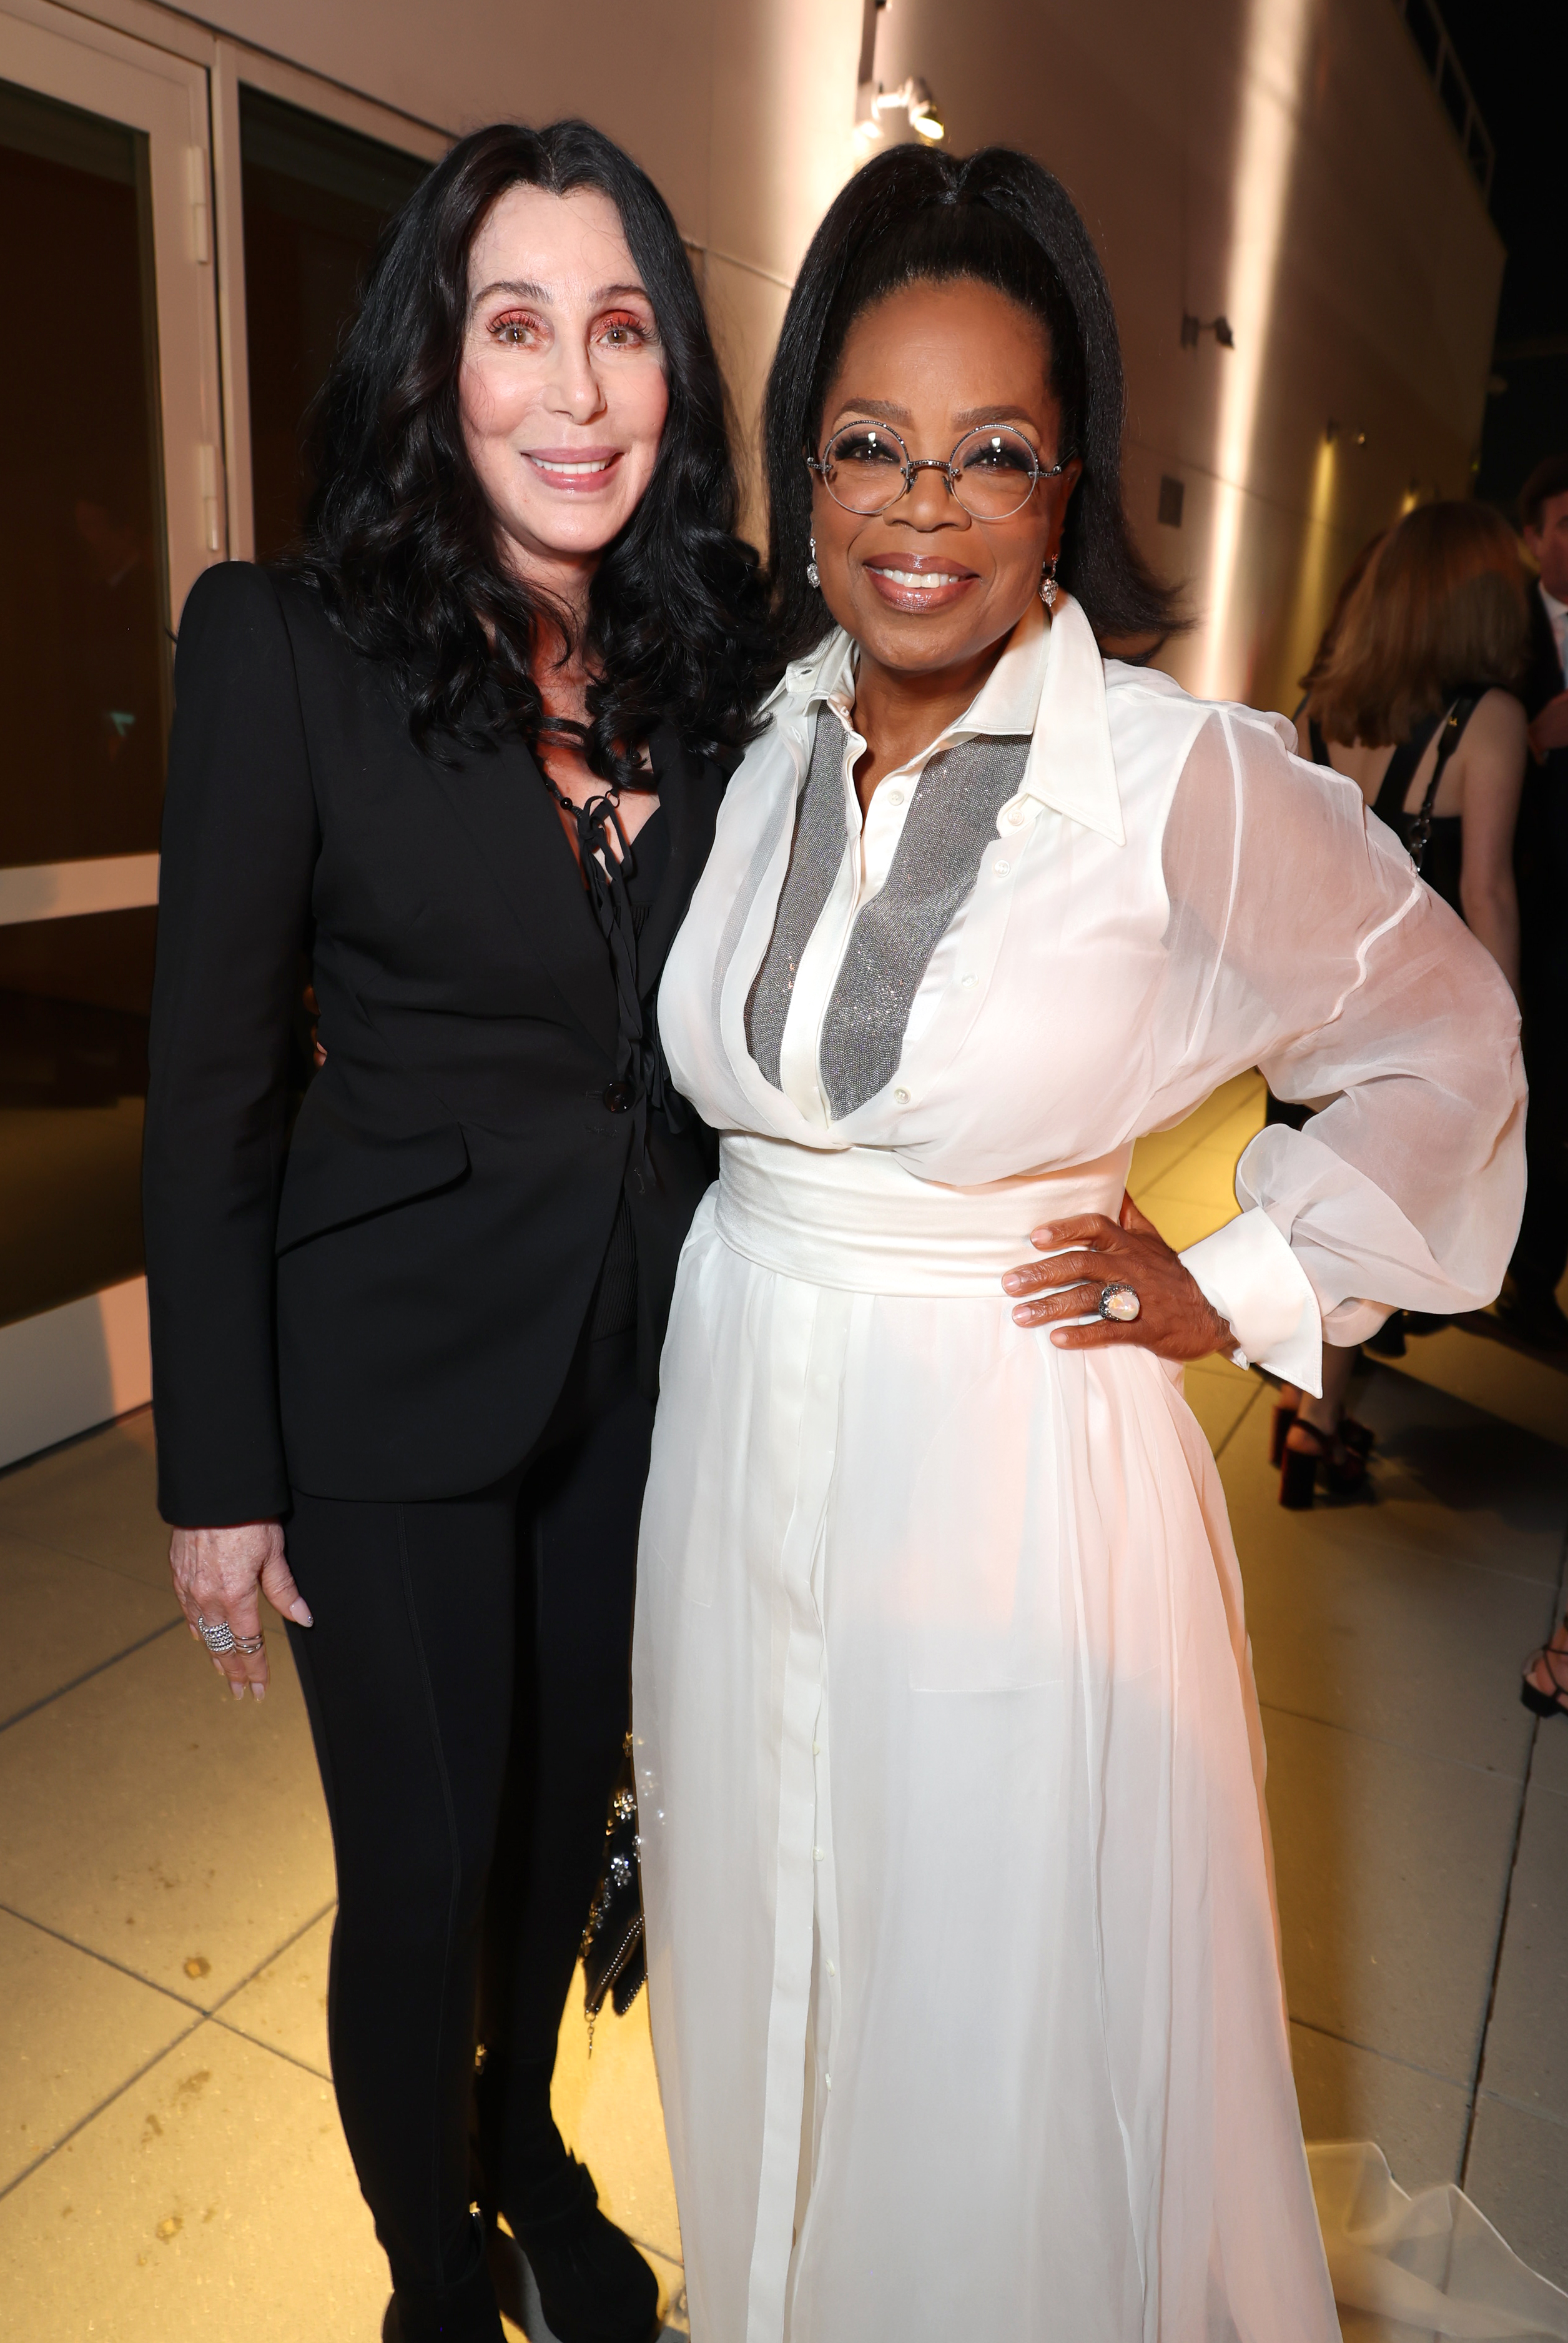 Cher and Oprah Winfrey attend Apple film's "Sidney" screening on September 23, 2022 in Los Angeles, California | Source: Getty Images